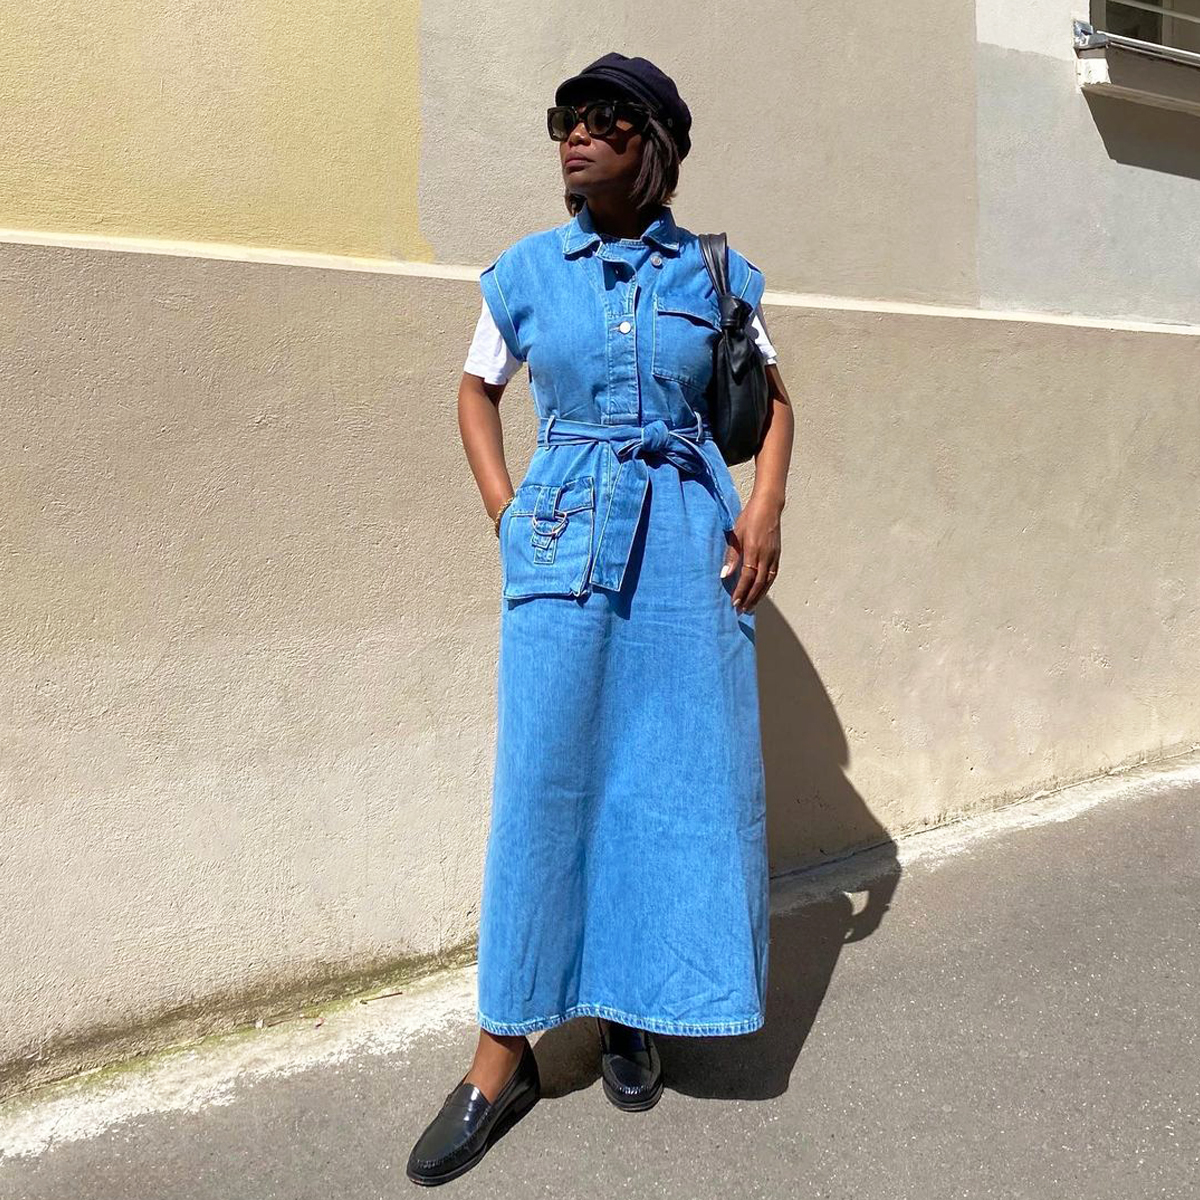 Chambray Dress Outfit Ideas - Jean Shirt Dress Outfits • COVET by tricia